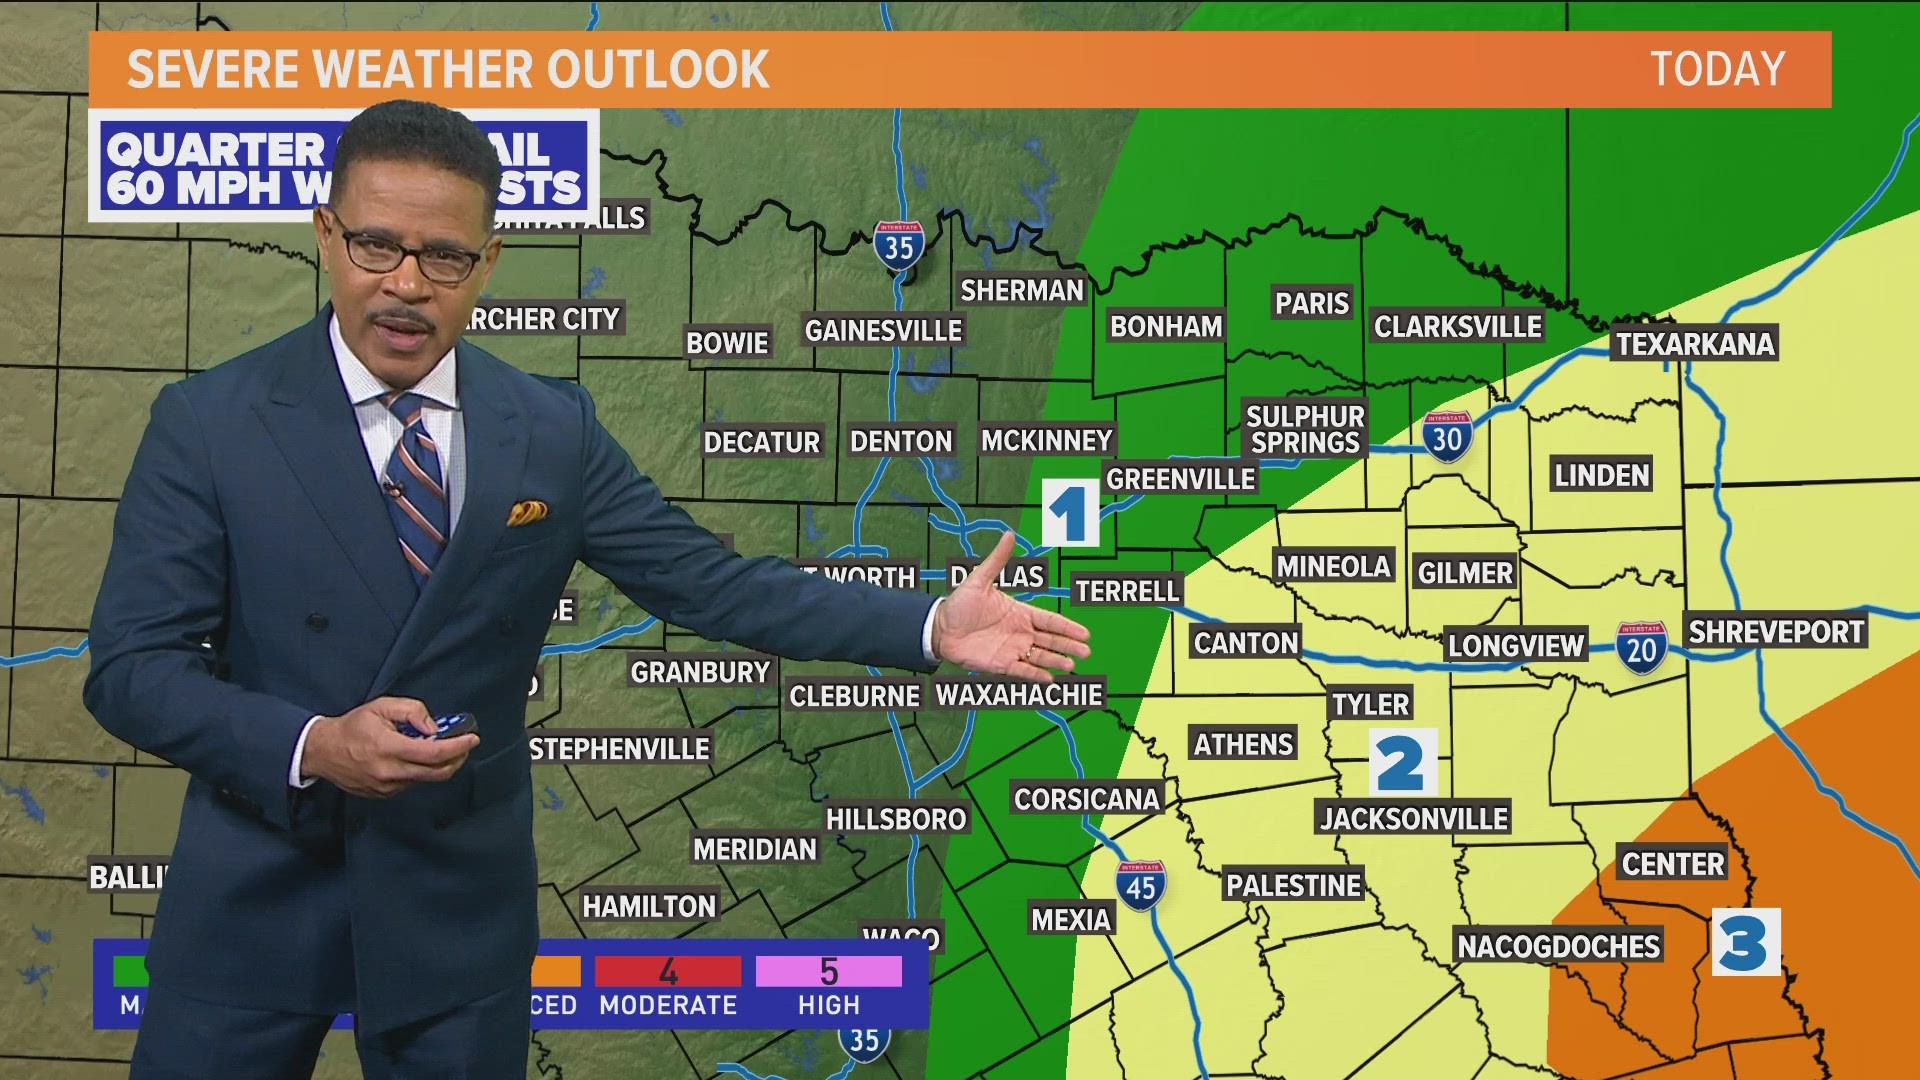 The severe weather is expected to be east of the DFW metroplex.